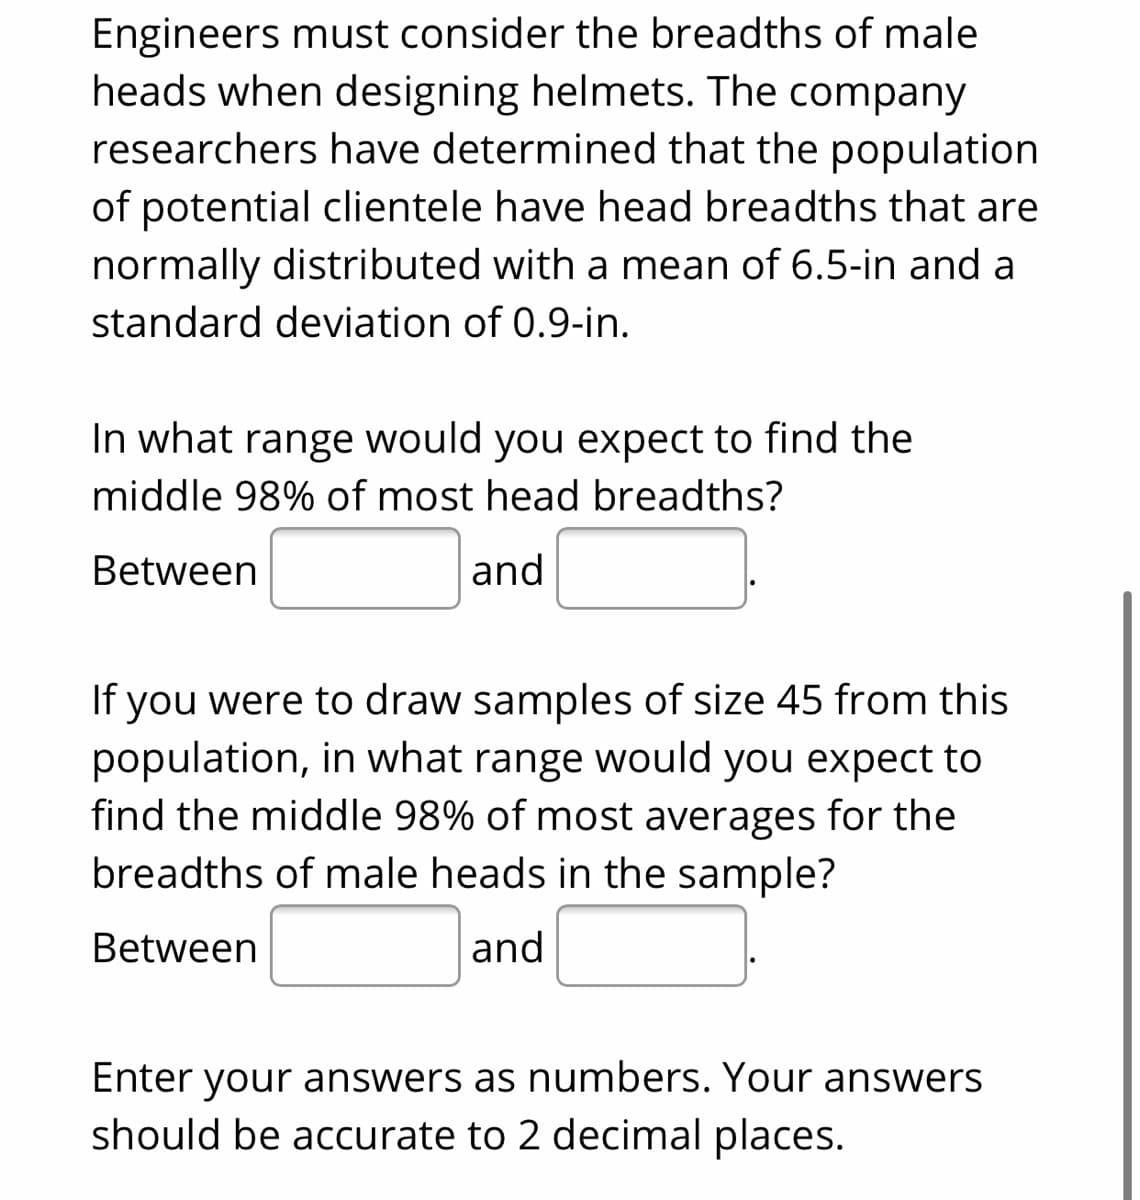 Engineers must consider the breadths of male
heads when designing helmets. The company
researchers have determined that the population
of potential clientele have head breadths that are
normally distributed with a mean of 6.5-in and a
standard deviation of 0.9-in.
In what range would you expect to find the
middle 98% of most head breadths?
Between
and
If you were to draw samples of size 45 from this
population, in what range would you expect to
find the middle 98% of most averages for the
breadths of male heads in the sample?
Between
and
Enter your answers as numbers. Your answers
should be accurate to 2 decimal places.
